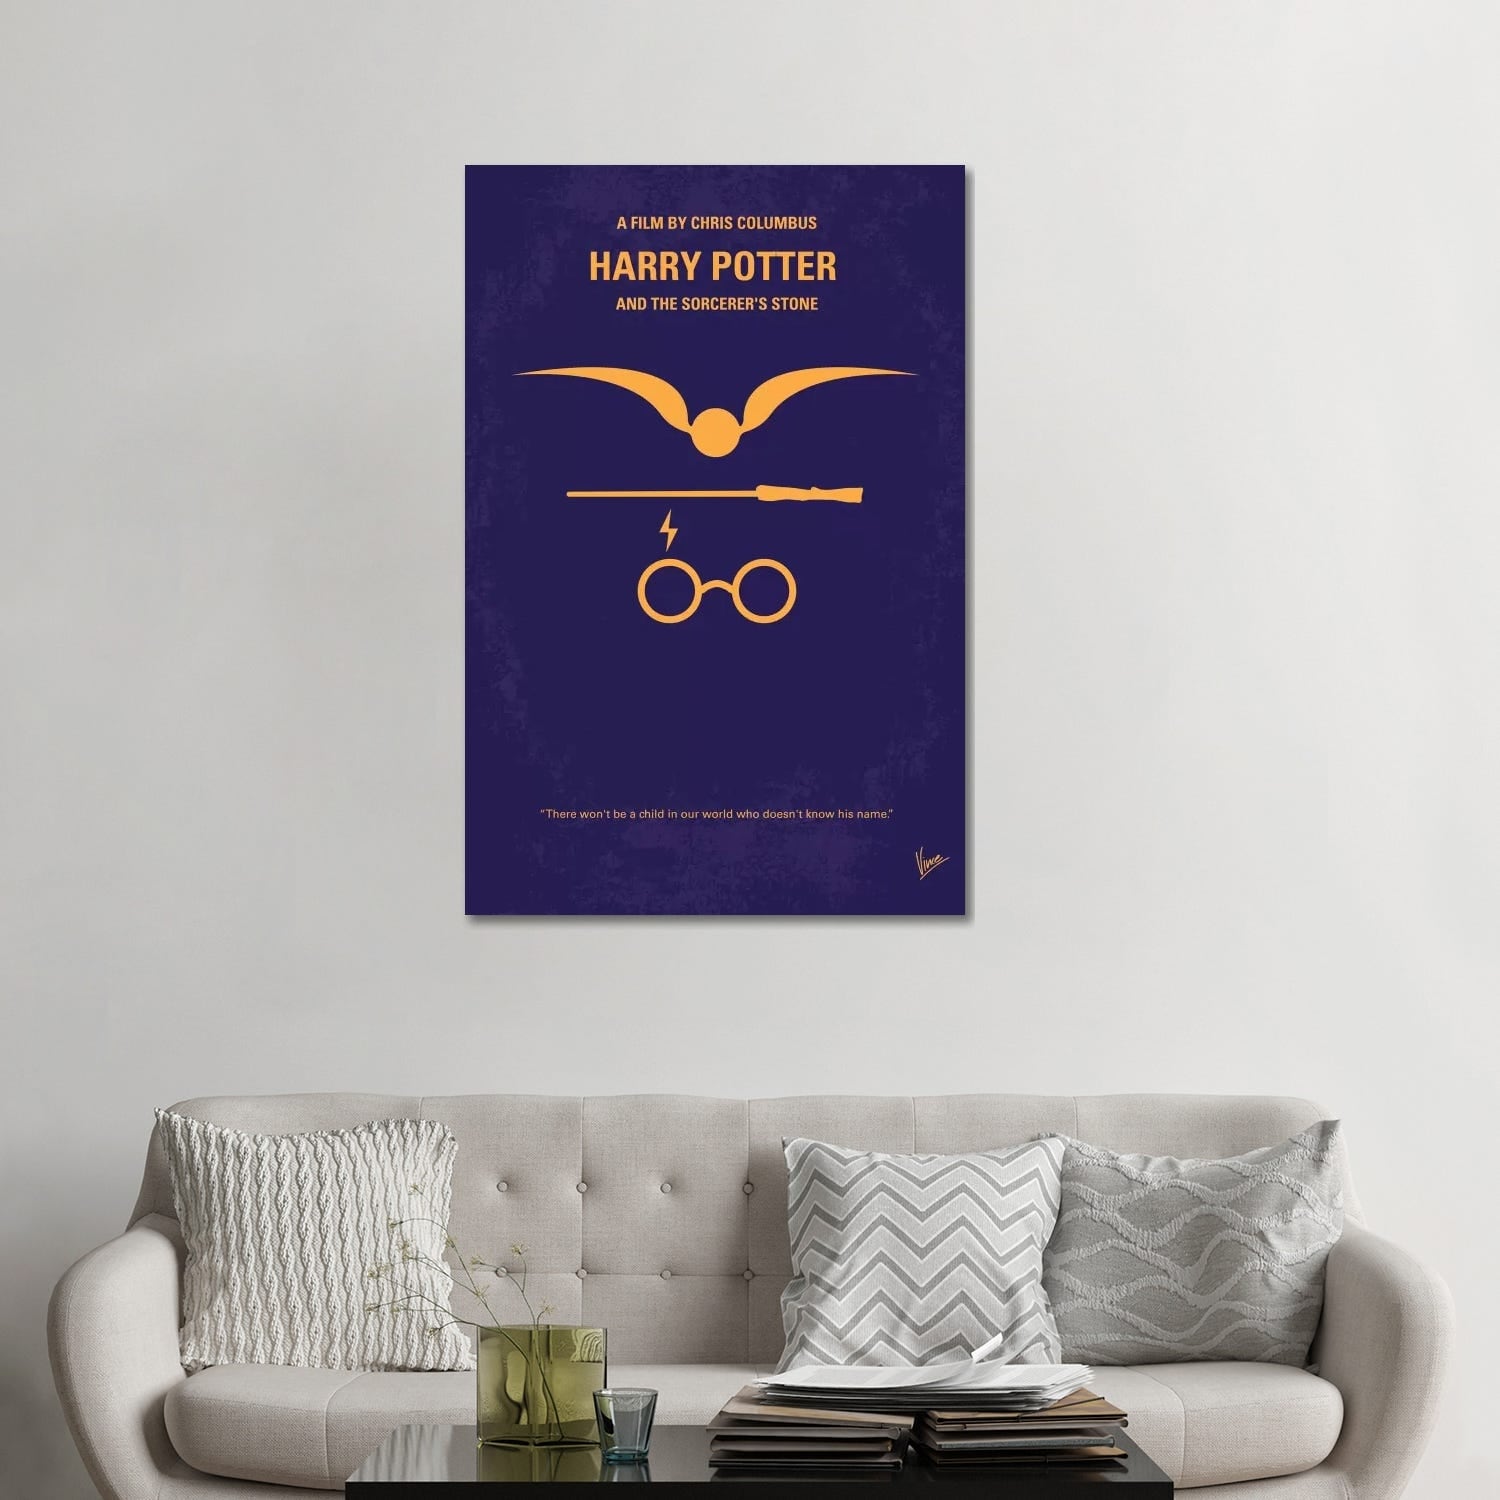 Harry Potter and the Deathly Hallows: Part I Movie Poster Print (27 x 40) -  Item # MOVCB57080 - Posterazzi